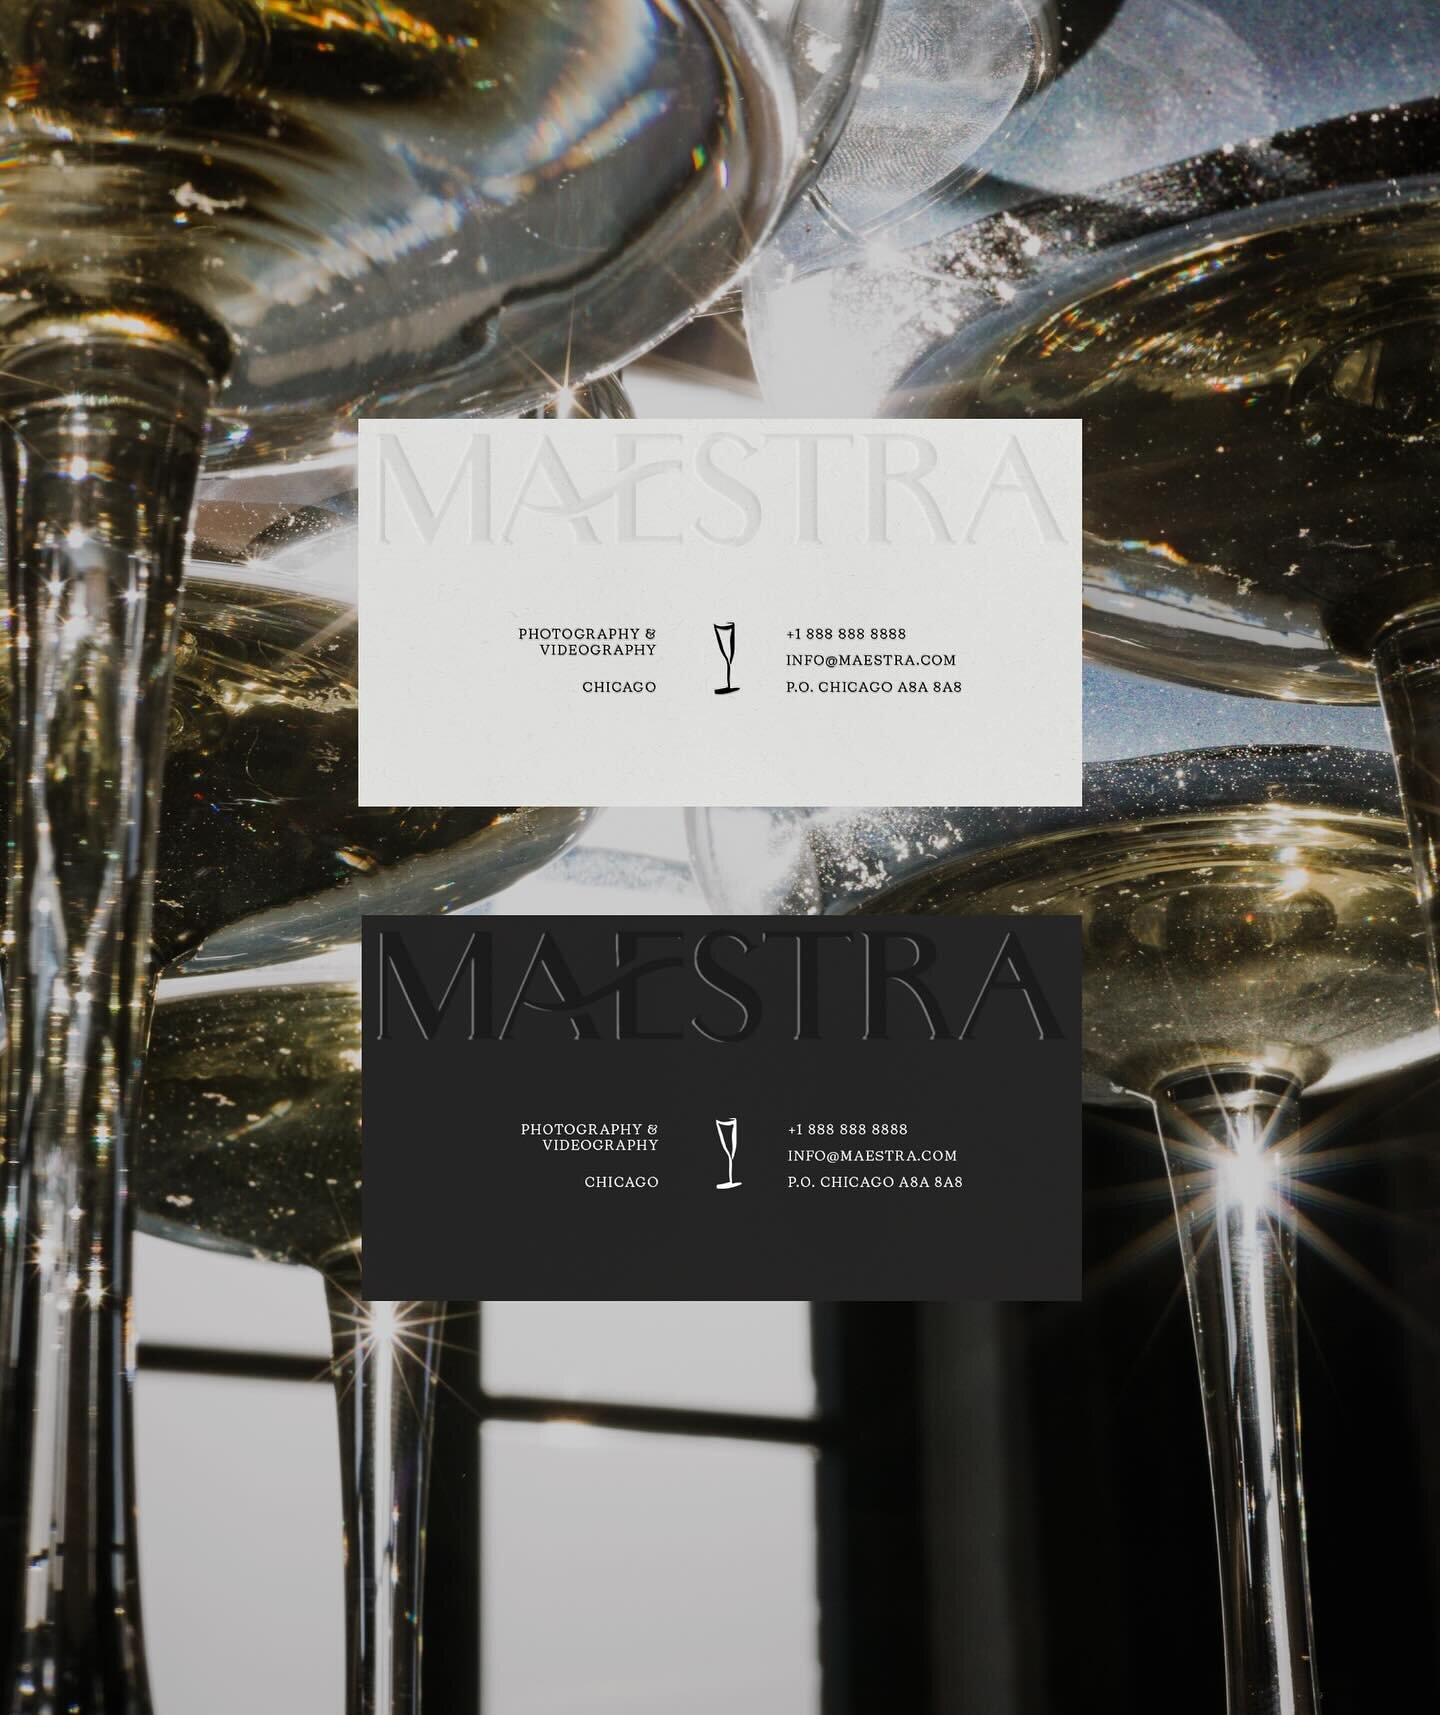 In the spirit of year-end celebrations, I am re launching Maestra Media Brand Identity with a more focused approach to serve the party-loving community 🎉

They are the go-to crew for capturing all those unforgettable moments through their lenses. Wh